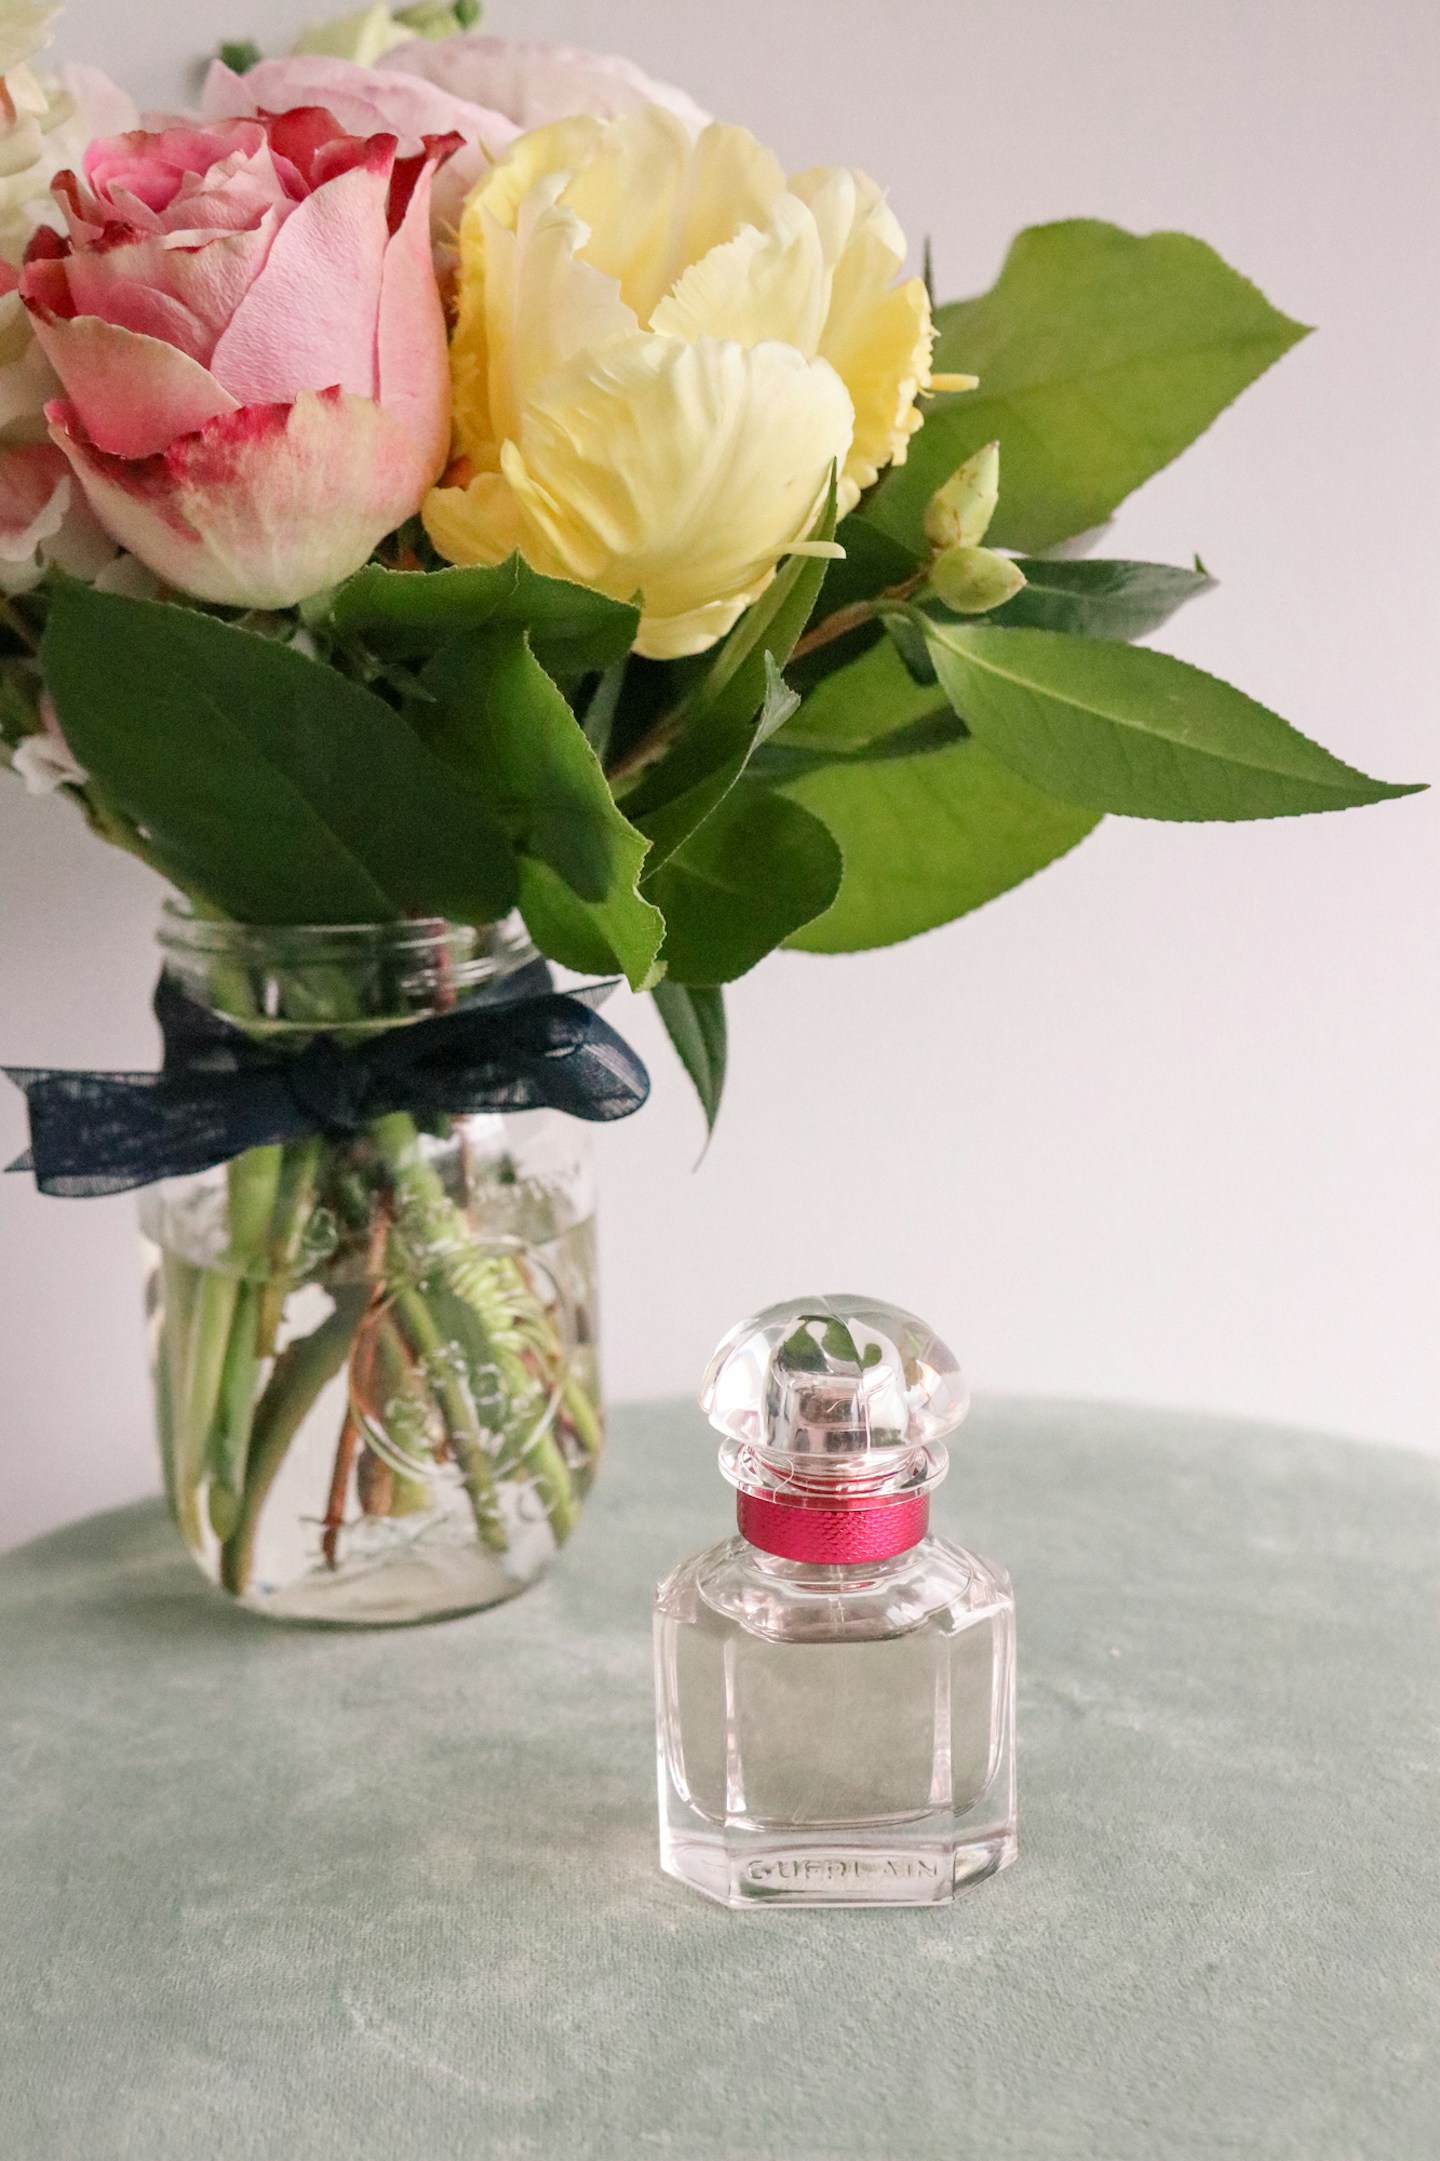 Mon Guerlain Bloom of Rose Eau de Toilette review: a fresh, spring fragrance with notes of citrus, lavender, rose and vanilla.